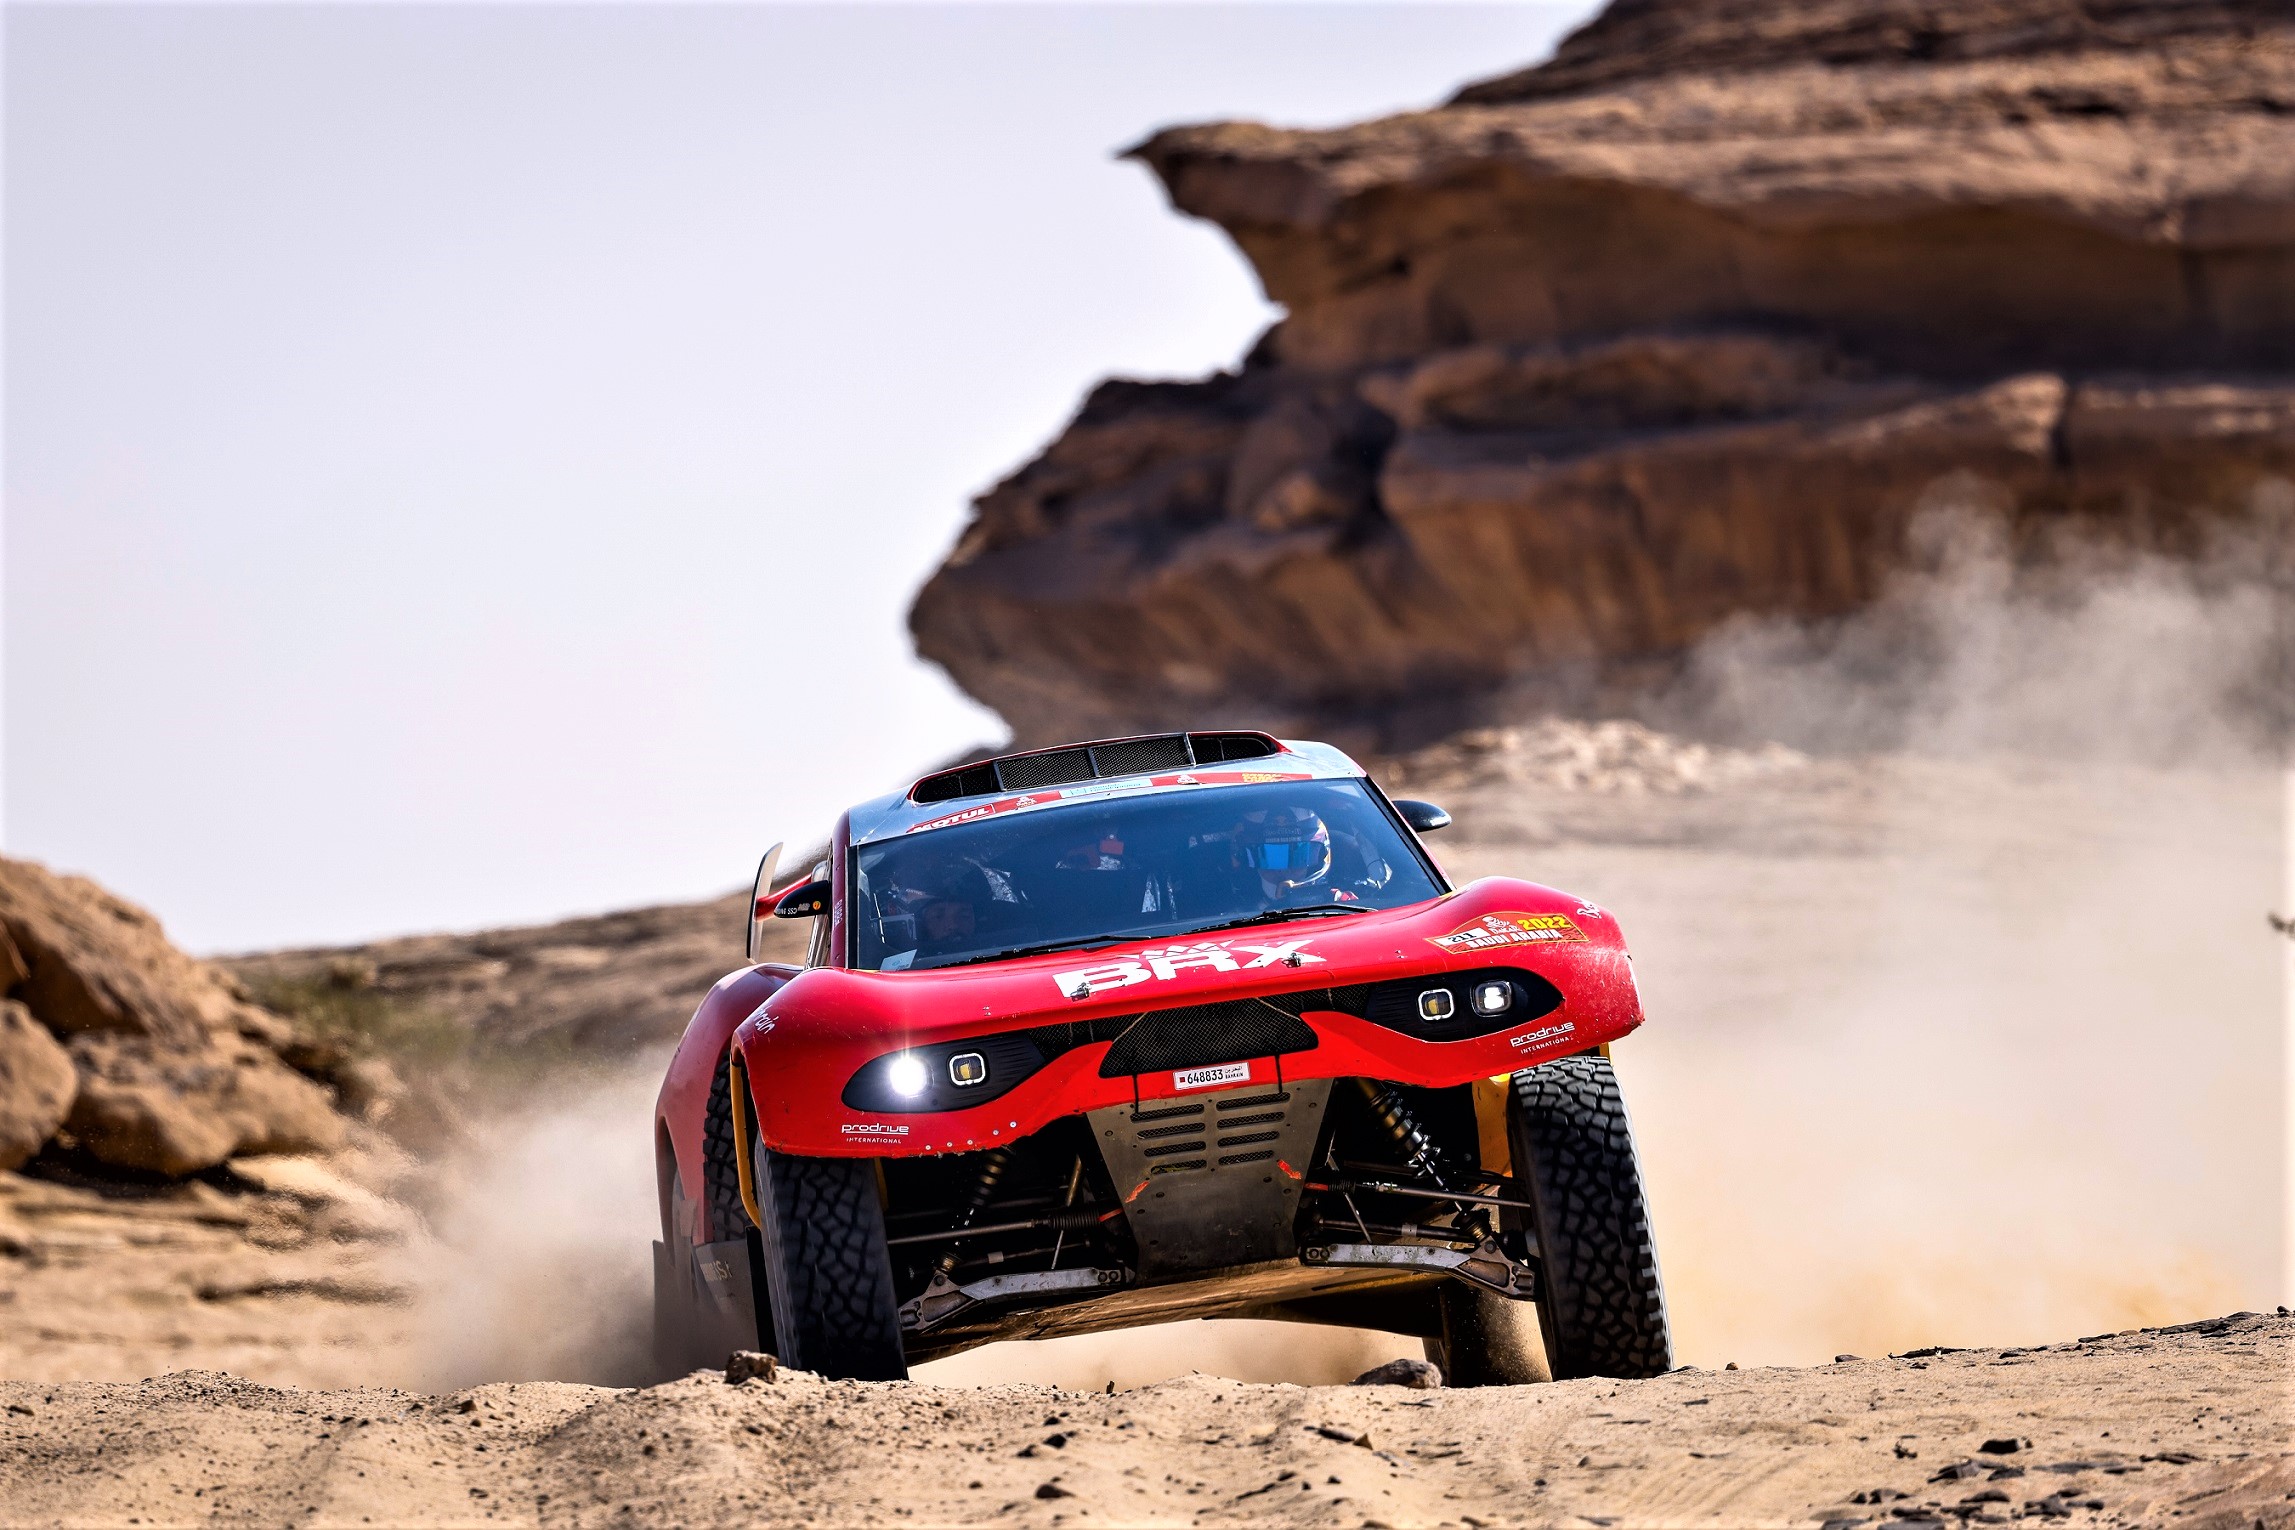 Team eyes record as first to complete world’s toughest  rally on sustainable fuel